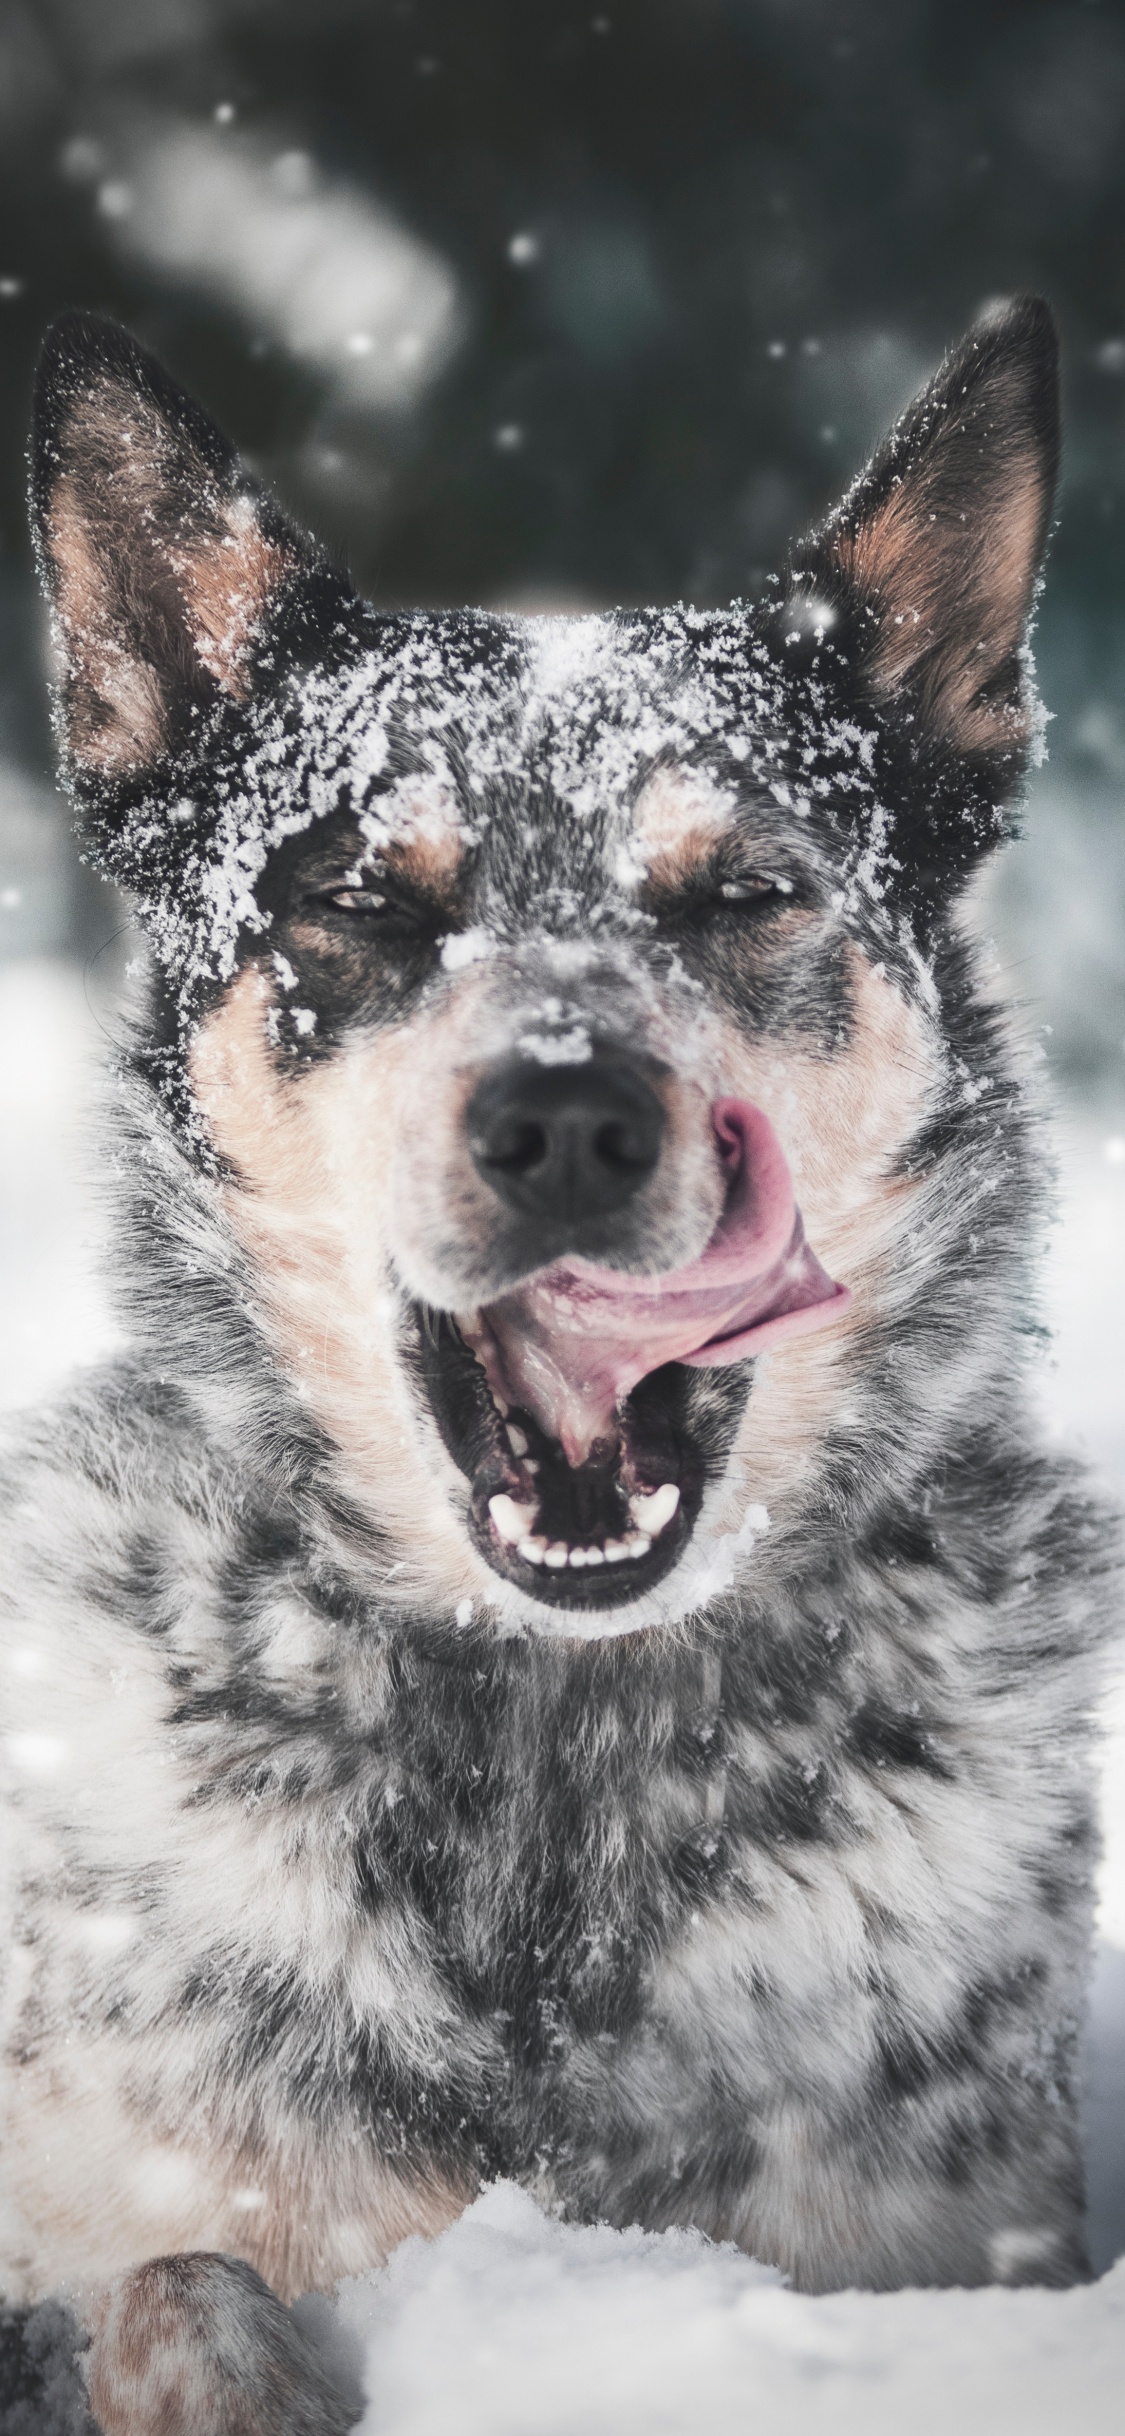 Black and White Short Coated Dog on Snow Covered Ground During Daytime. Wallpaper in 1125x2436 Resolution